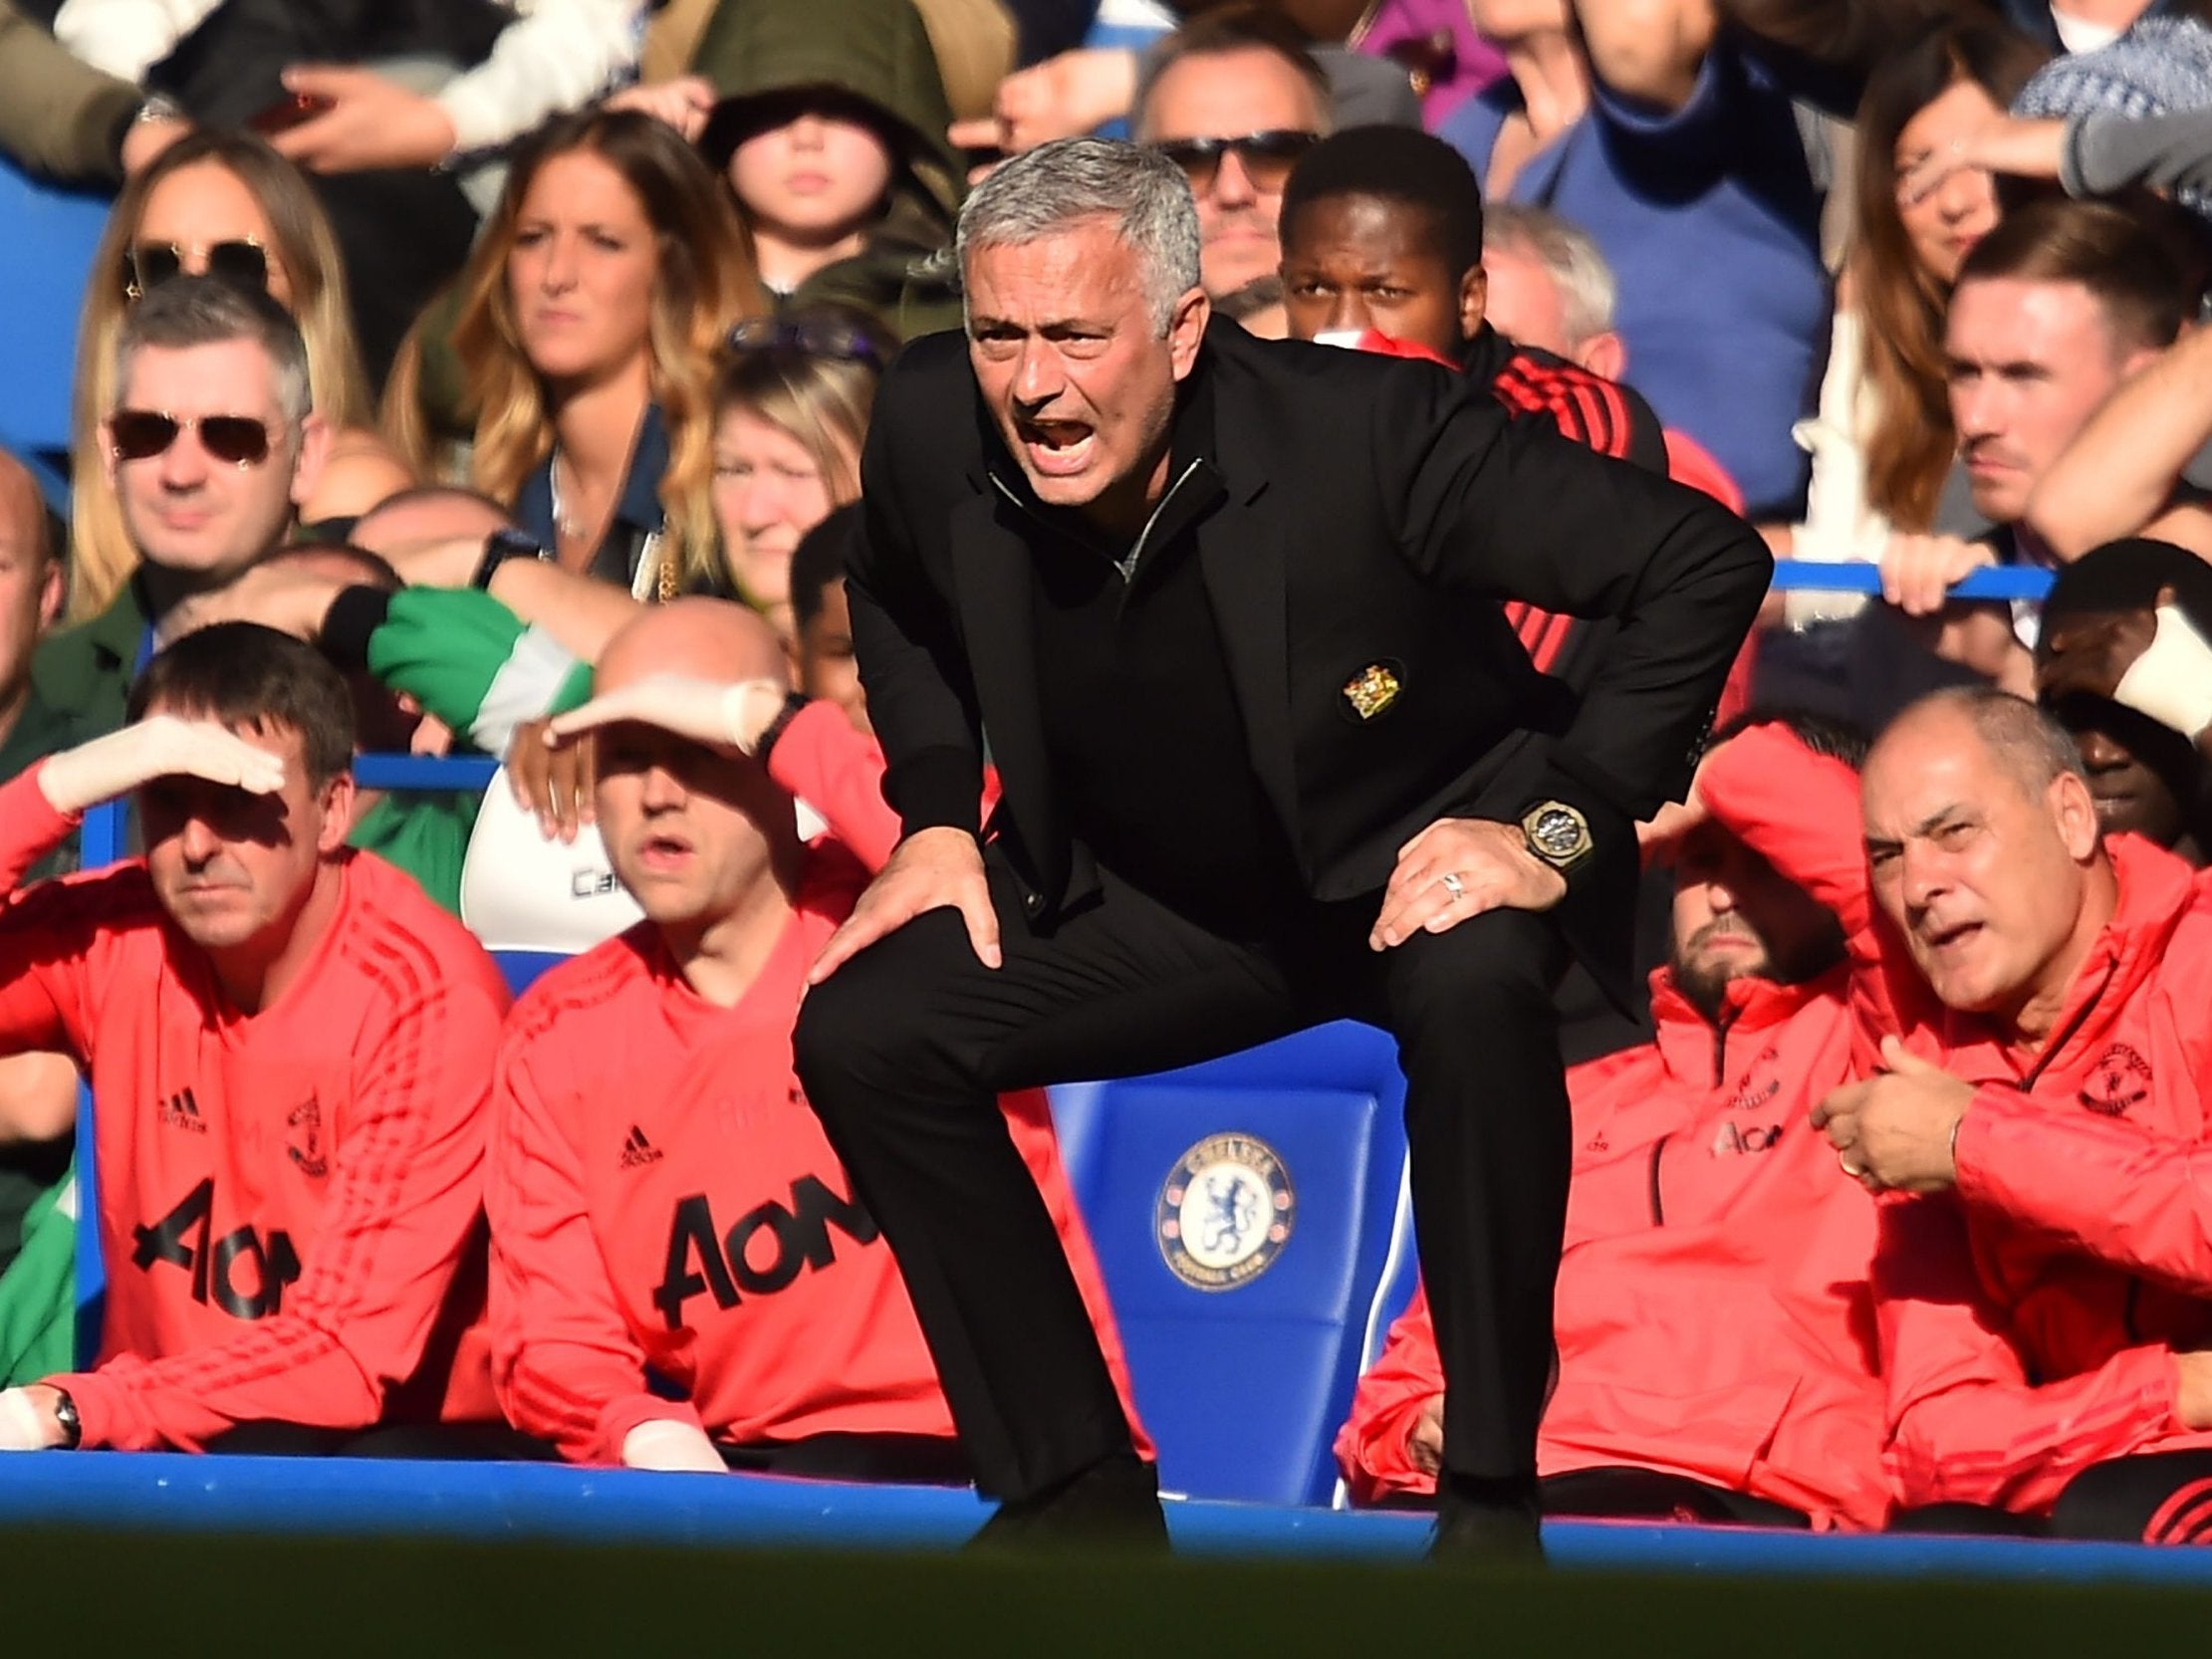 Chelsea vs Manchester United: Why it&apos;s time for Jose Mourinho to finally embrace the chaos